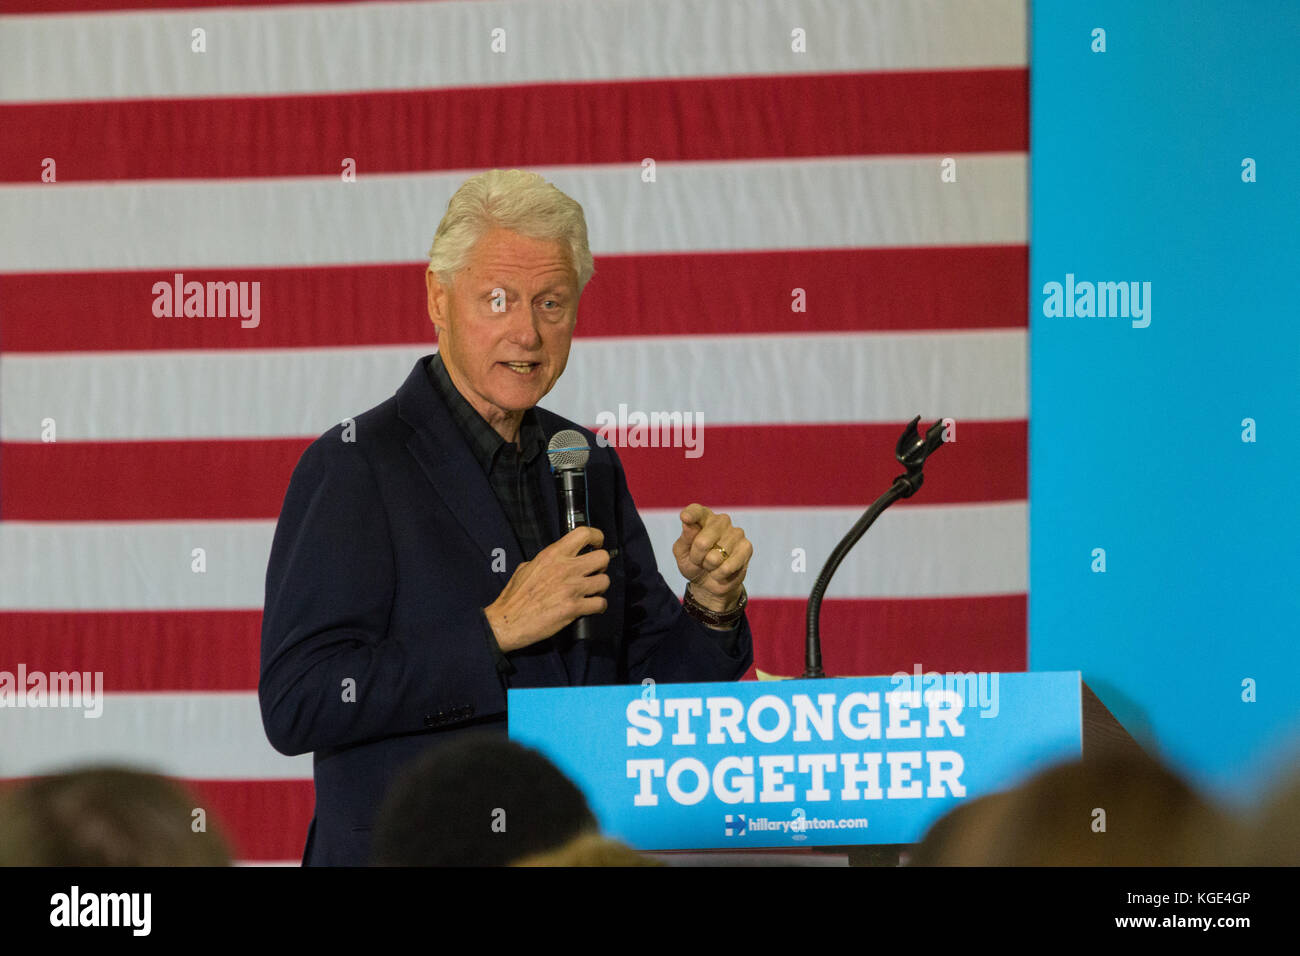 Reading, PA - October 28, 2016: Former US President Clinton campaigns at a Democrat rally for his wife Hillary at Albright College. Stock Photo